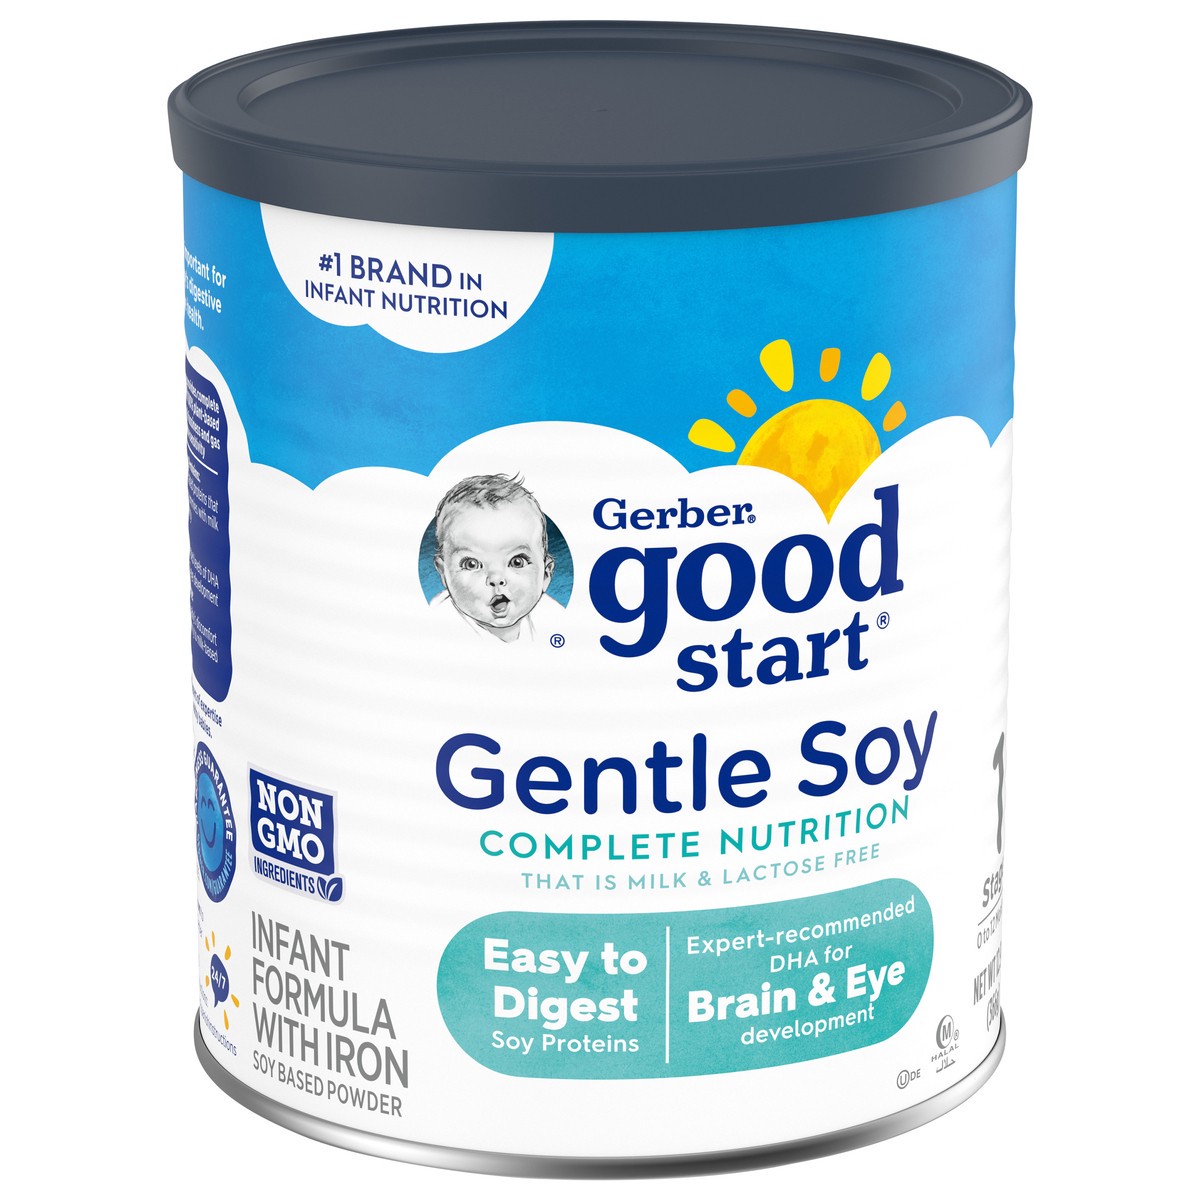 slide 2 of 9, Gerber Good Start Gentle Soy Lactose-Free Non-GMO Powder Baby Formula with Iron, 12.9 oz Canister, 12.9 oz